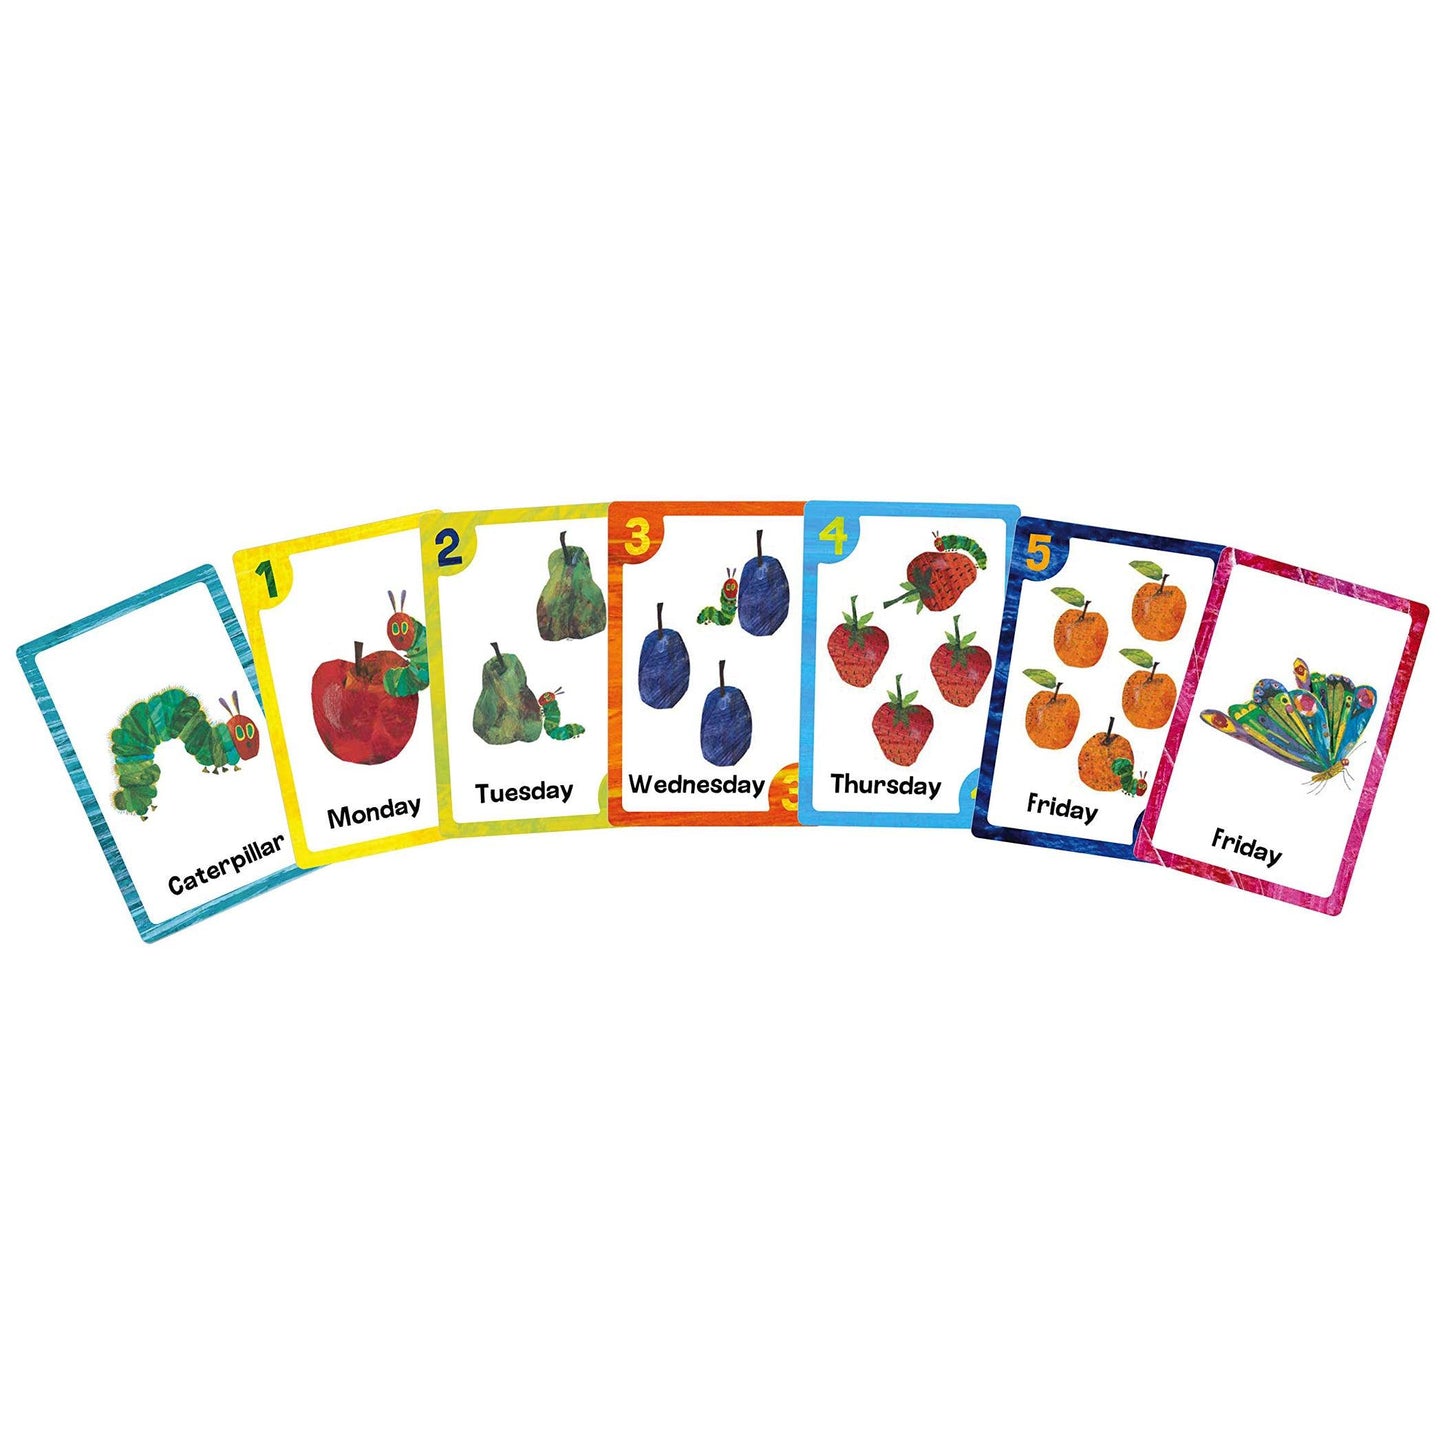 The World of Eric Carle™ The Very Hungry Caterpillar™ Card Game, Pack of 3 - Loomini